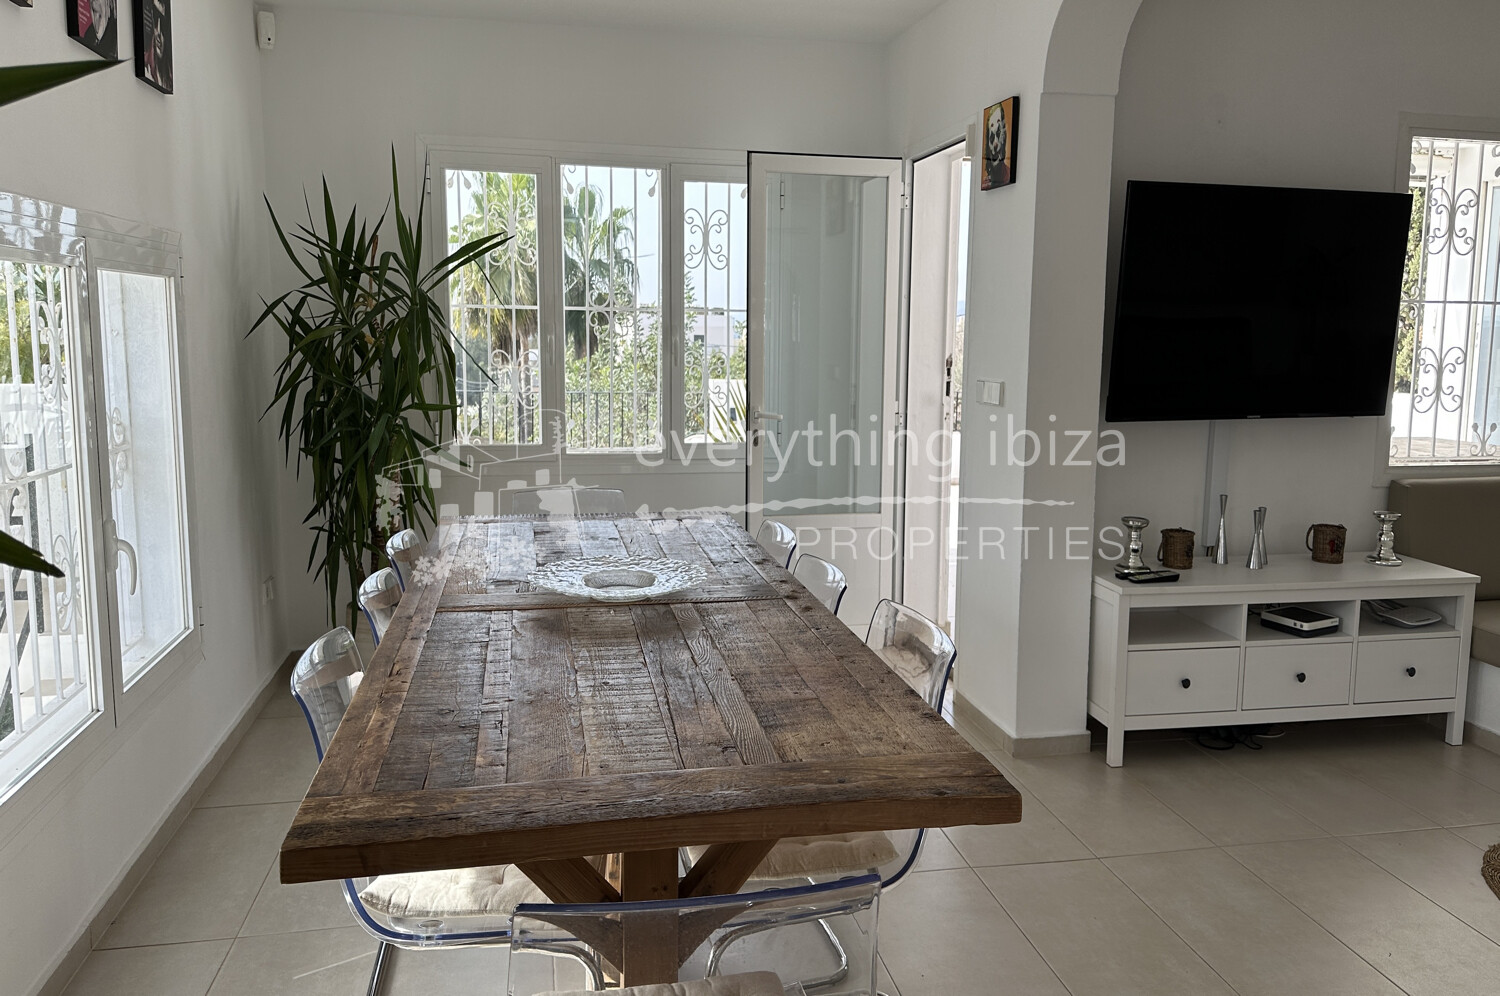 Lovely Spacious Villa in Popular Talamanca Close to the Beach, ref. 1539, for sale in Ibiza by everything ibiza Properties